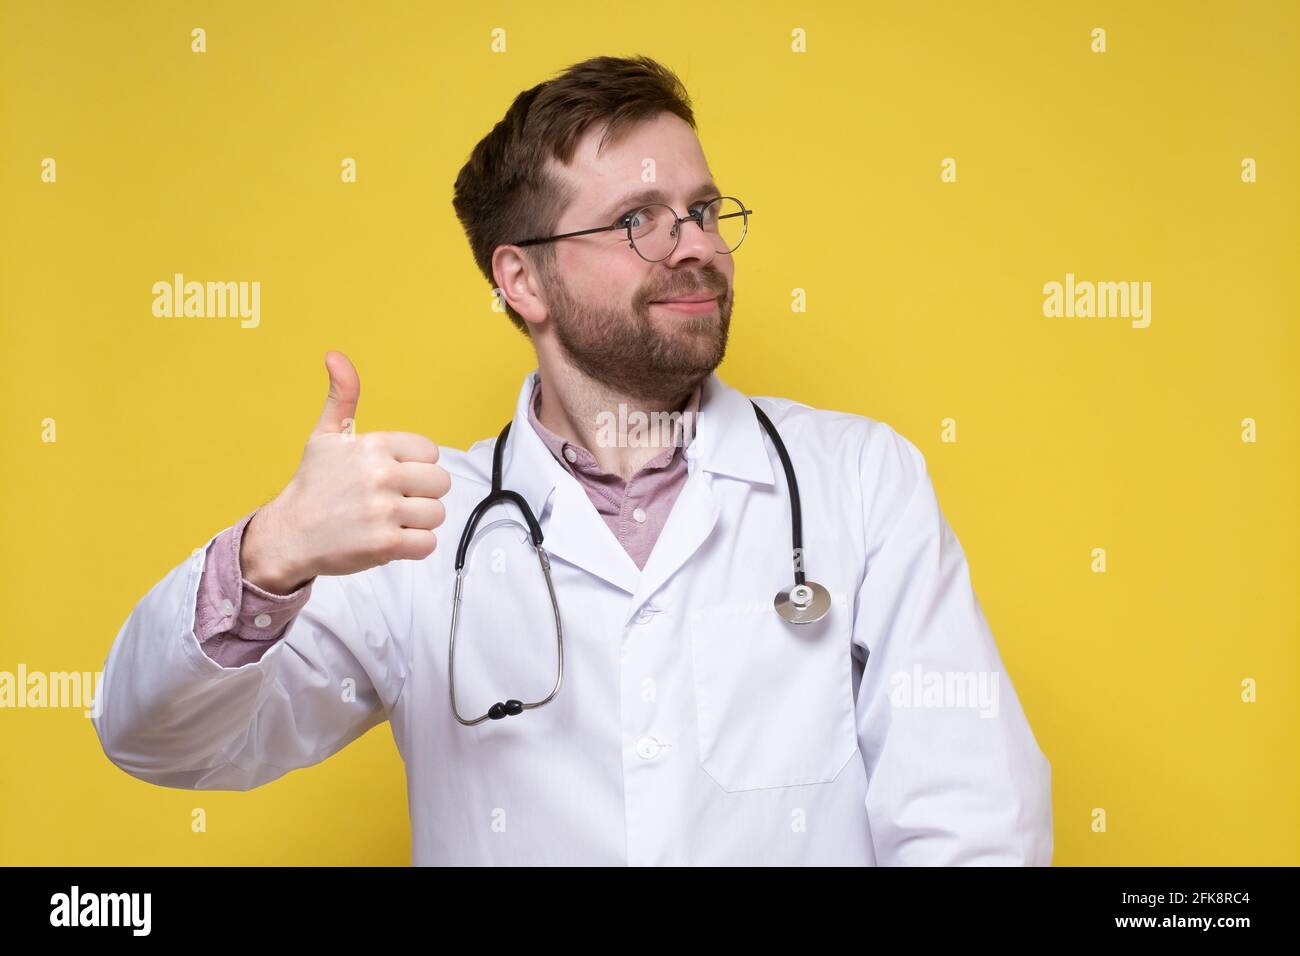 Cute, contented doctor shows an approving gesture, thumbs up and smiles friendly while looking into the camera.  Stock Photo